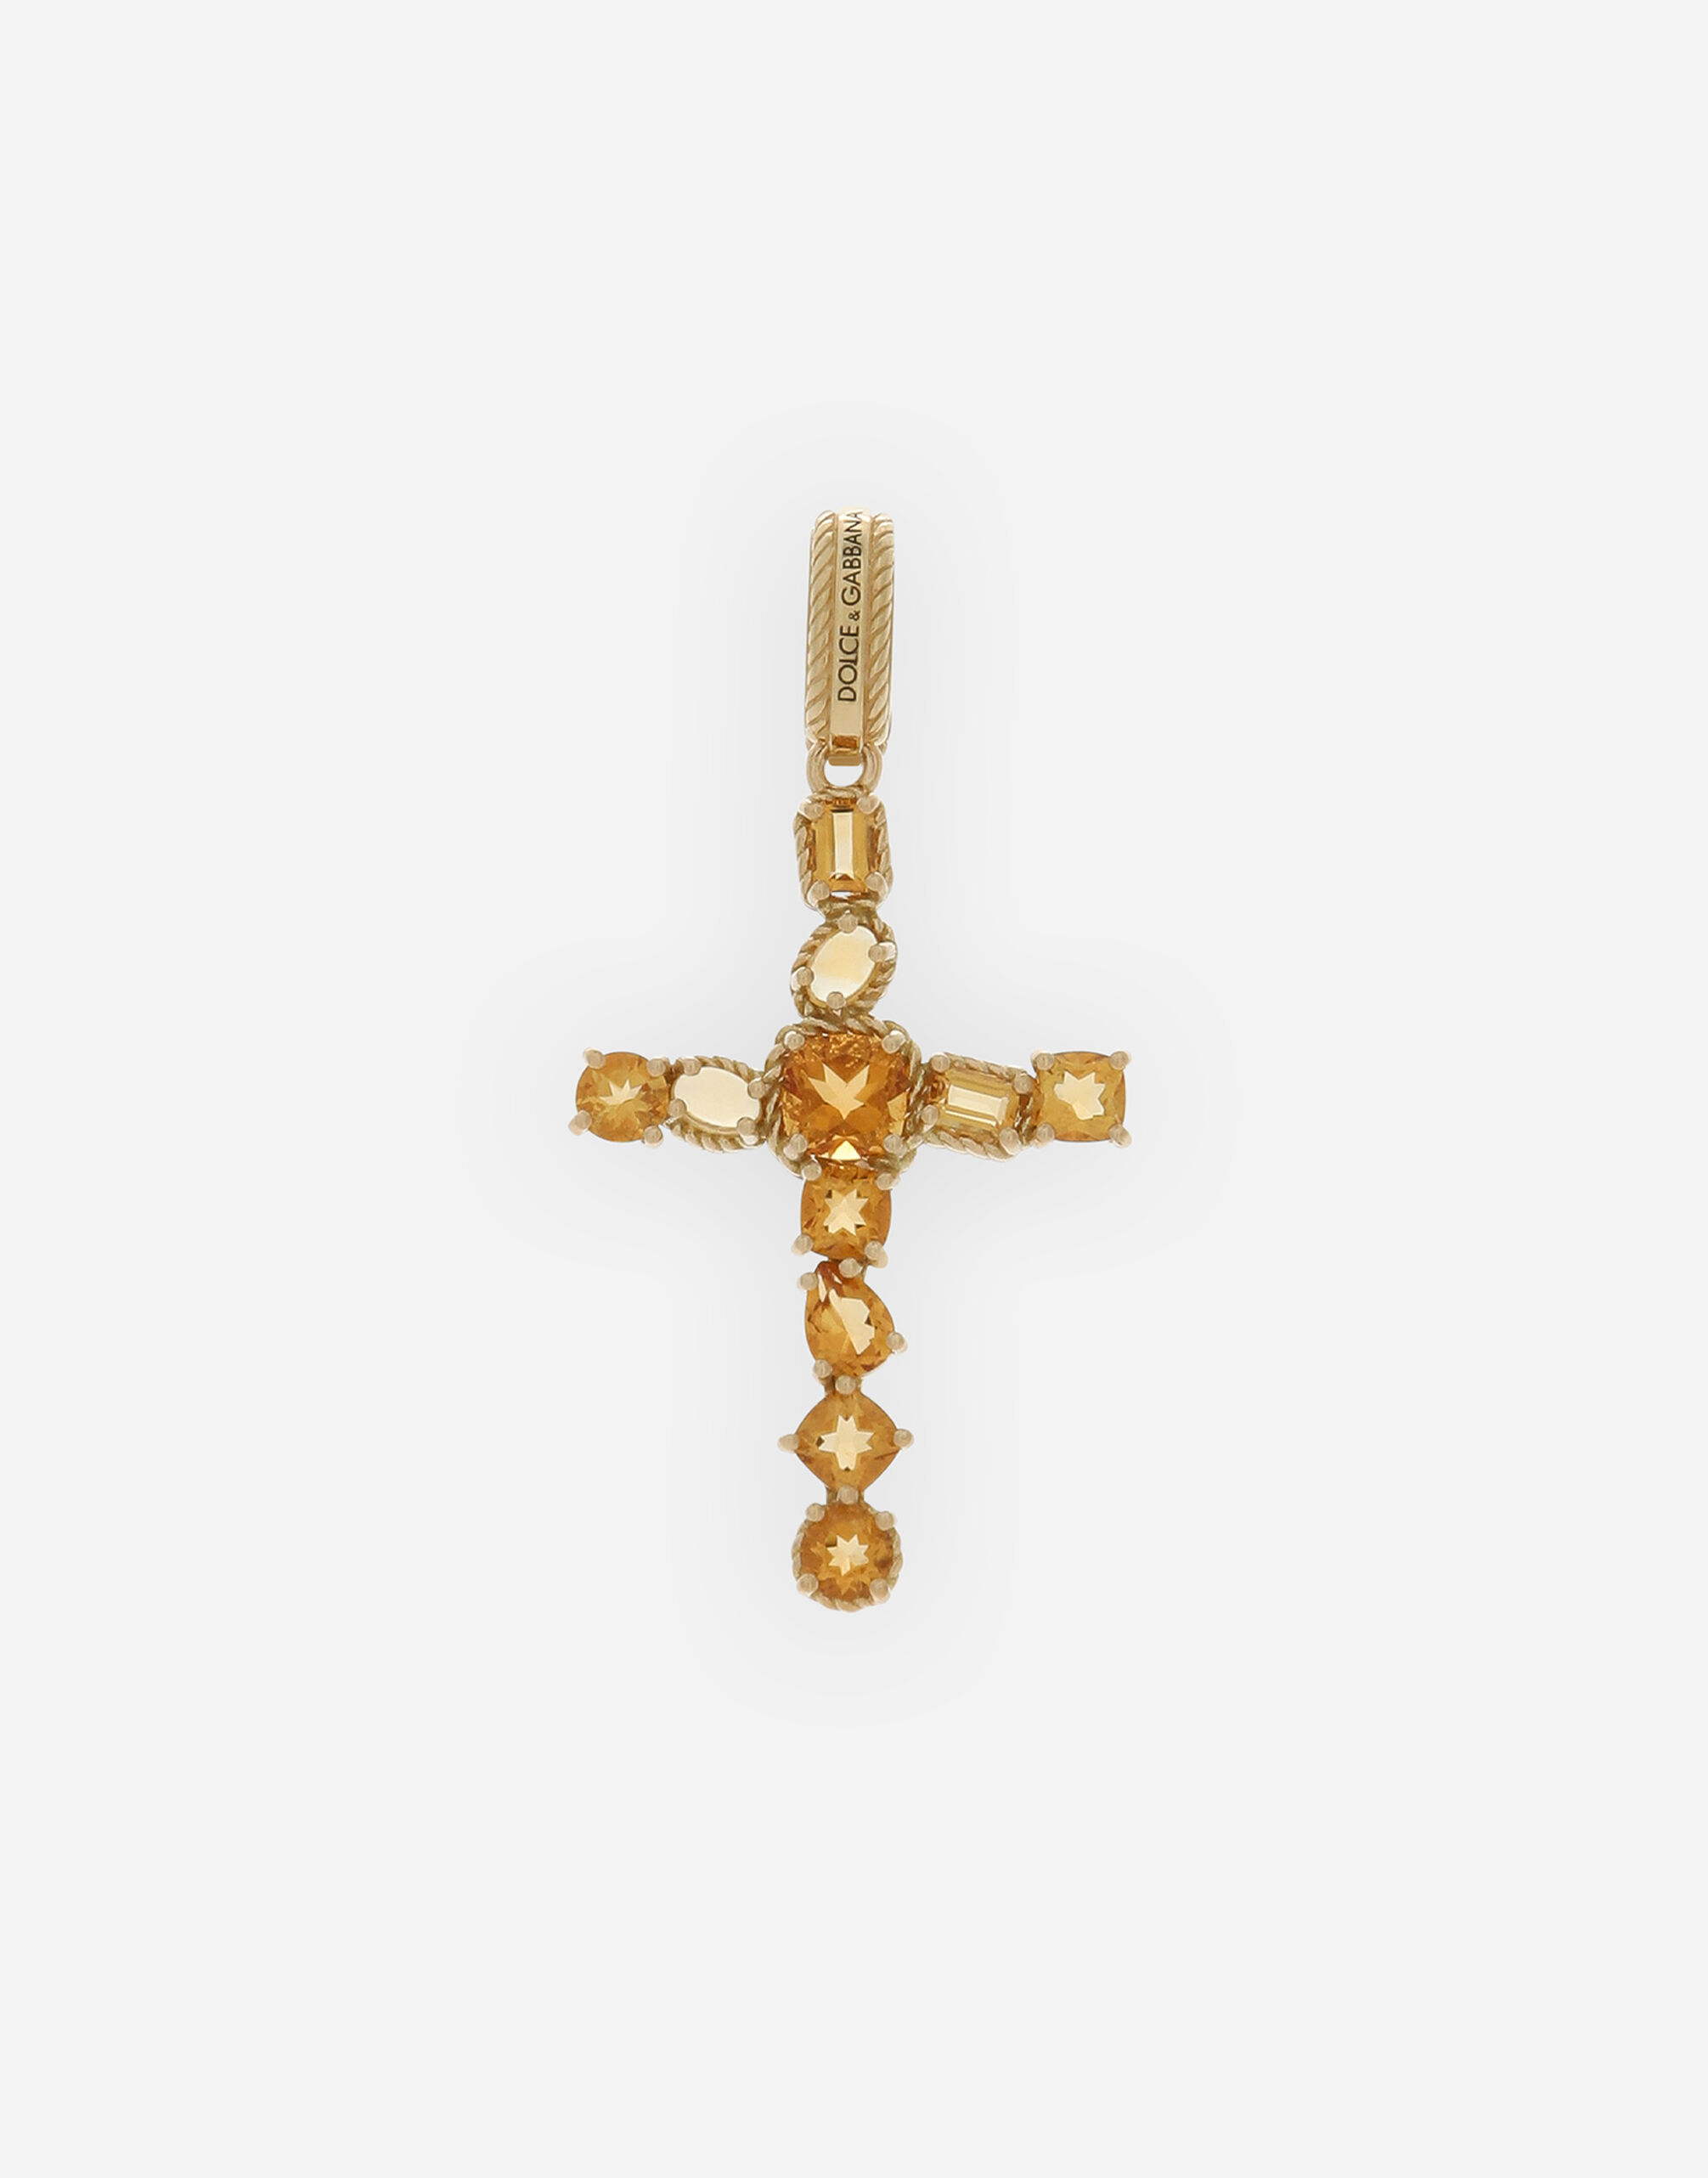 Dolce & Gabbana Anna charm in yellow gold 18kt with citrines quartzes White WAQA3GWTOLB